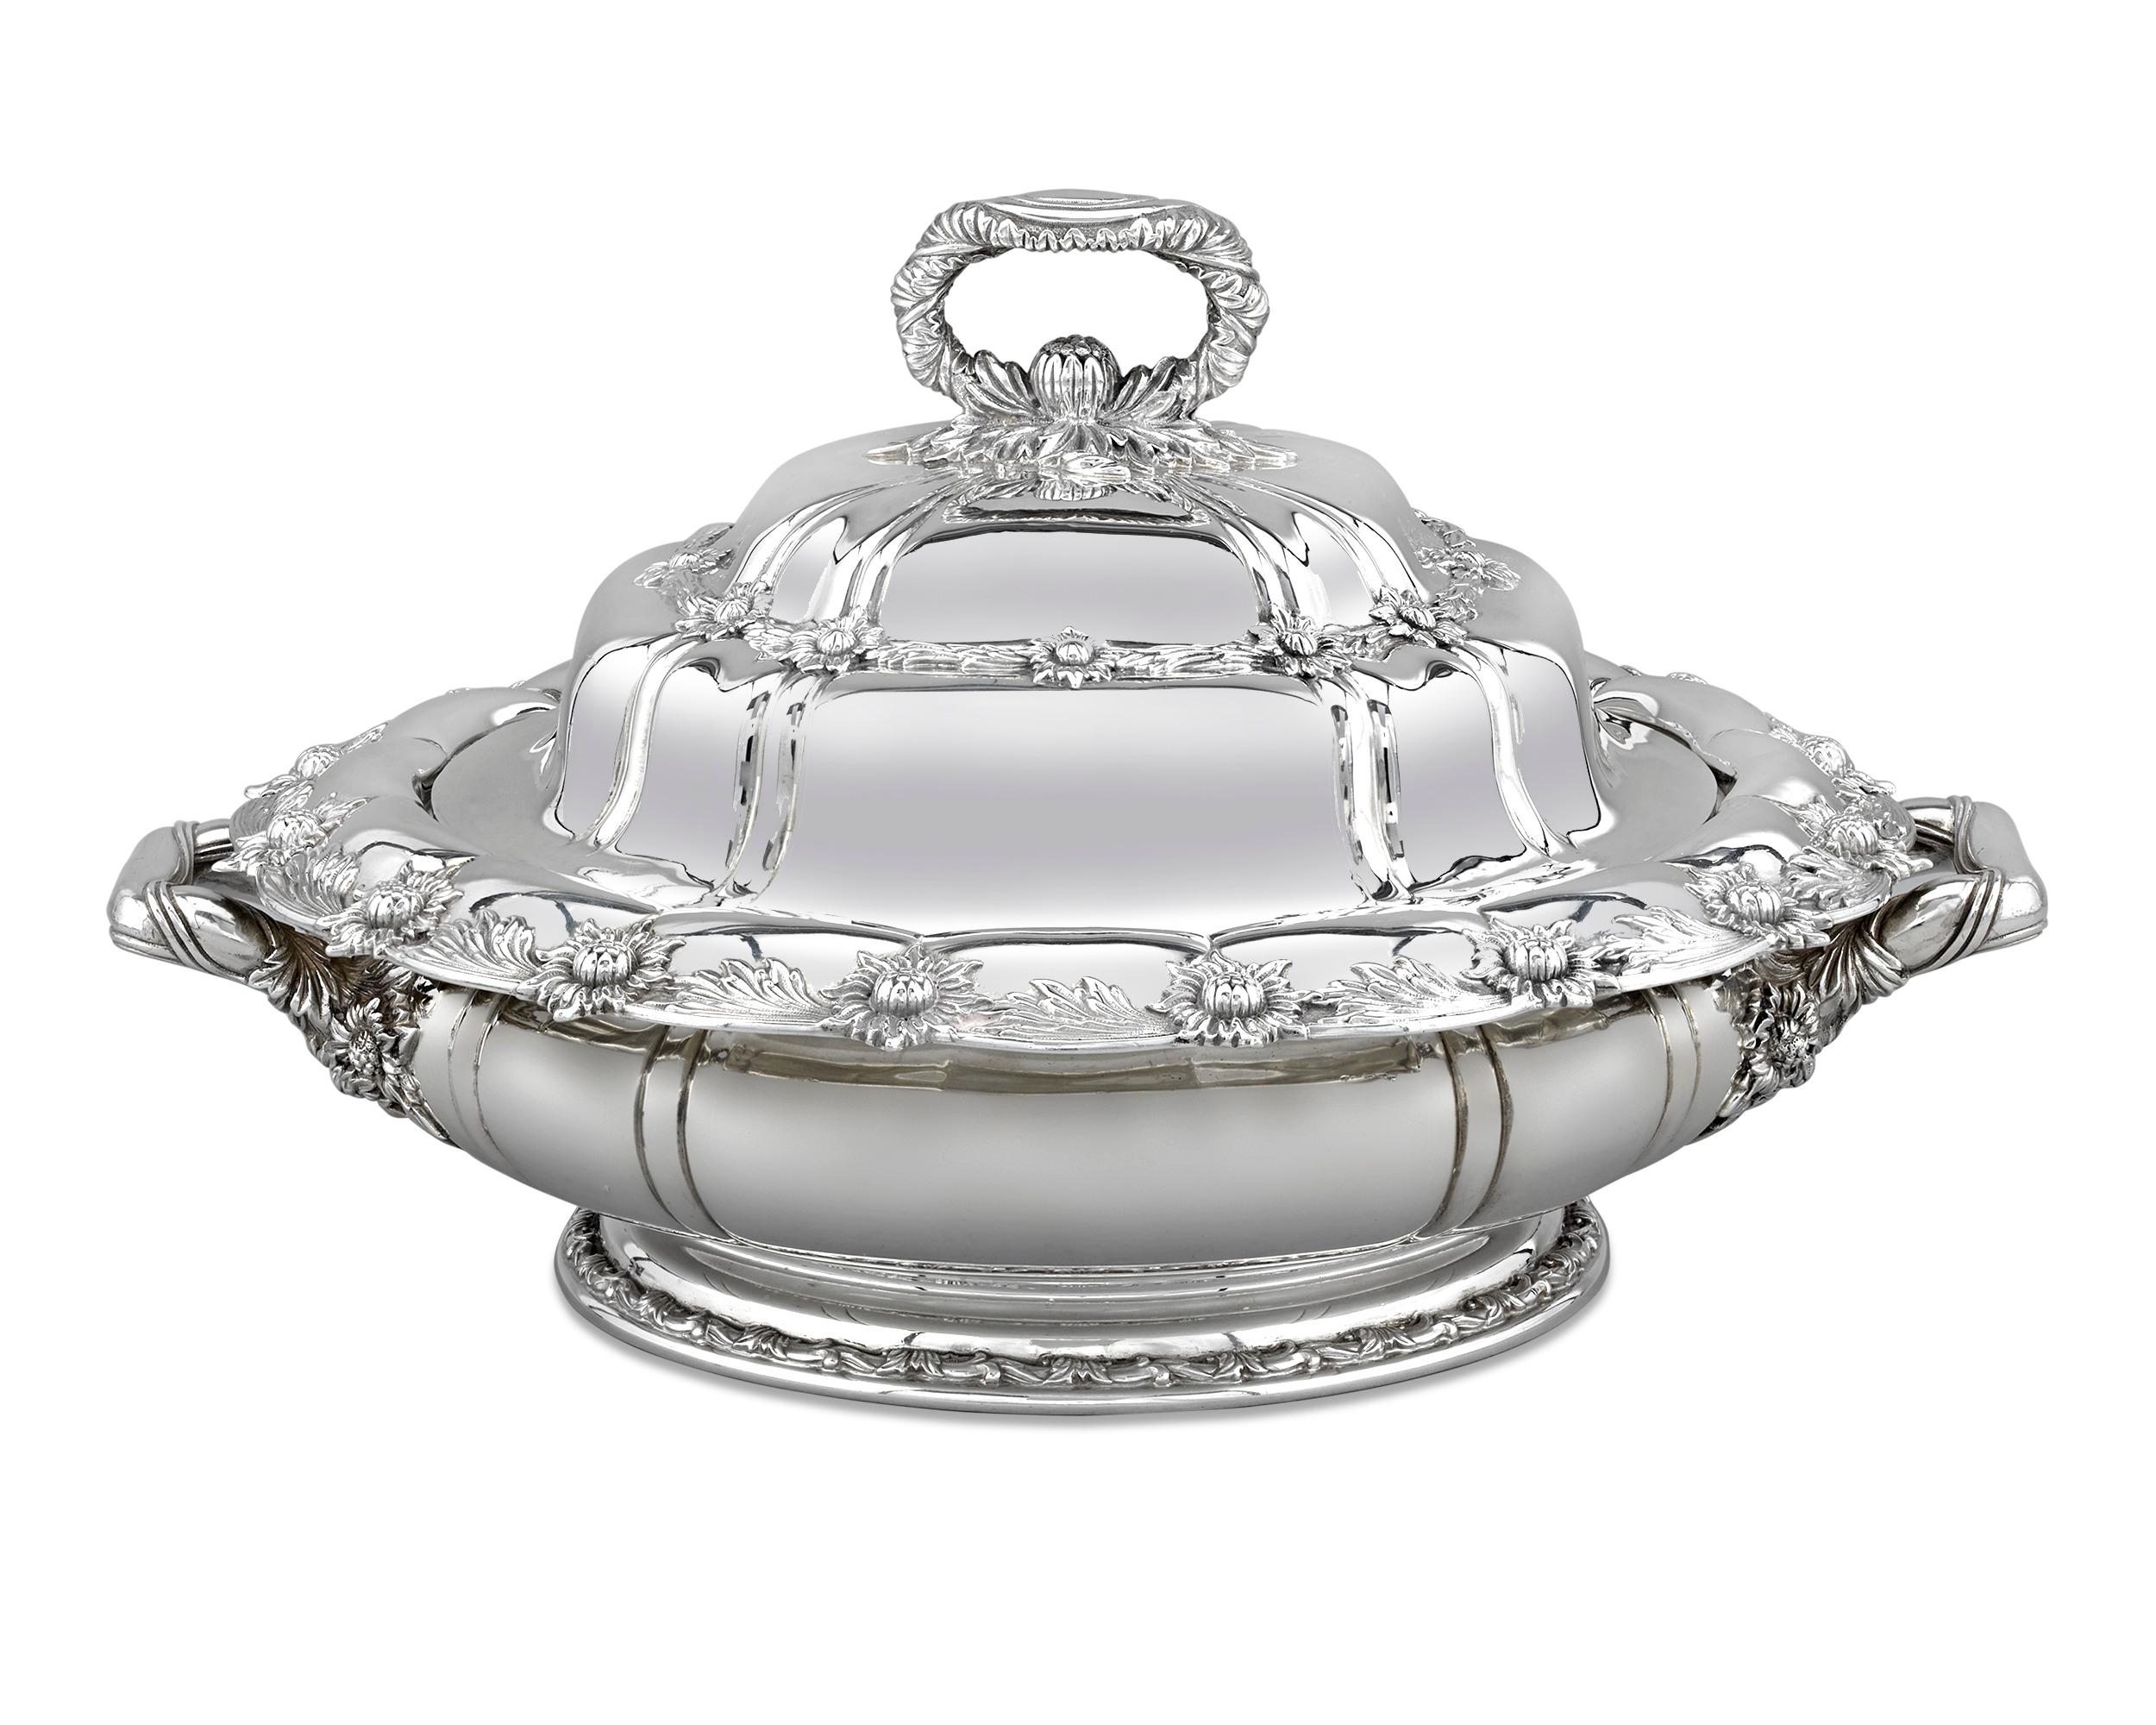 This exceptional sterling silver covered serving dish by Tiffany & Co. is crafted in the iconic Chrysanthemum pattern, one of the most loved sterling patterns ever made. Because of its intricacy, this pattern was also among the most expensive motifs